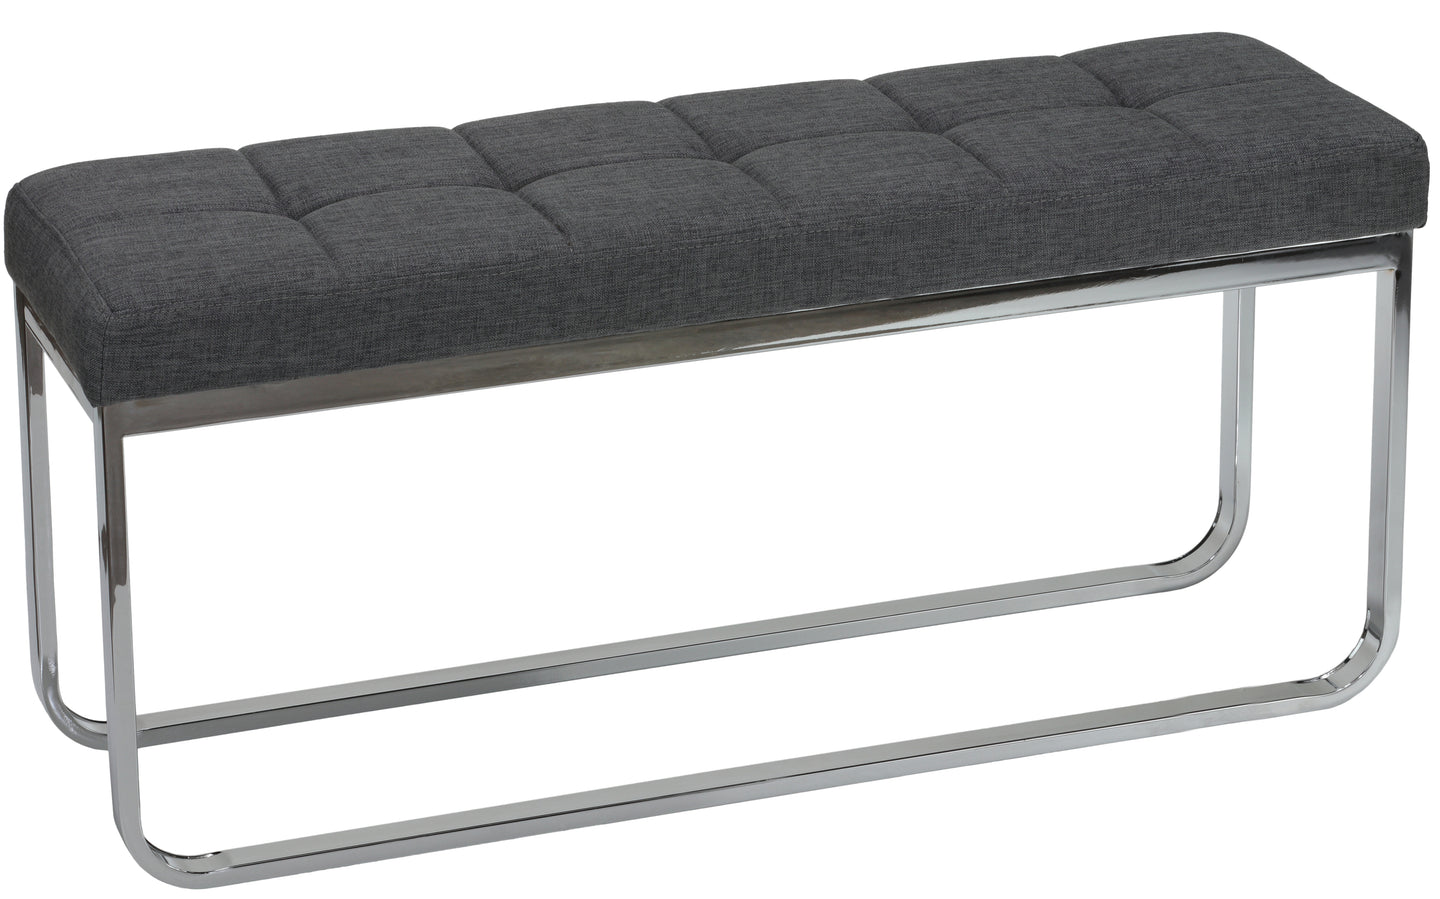 Cortesi Home Nola Contemporary Narrow Bench in Grey Linen Fabric with Rounded Polished Stainless Steel Legs